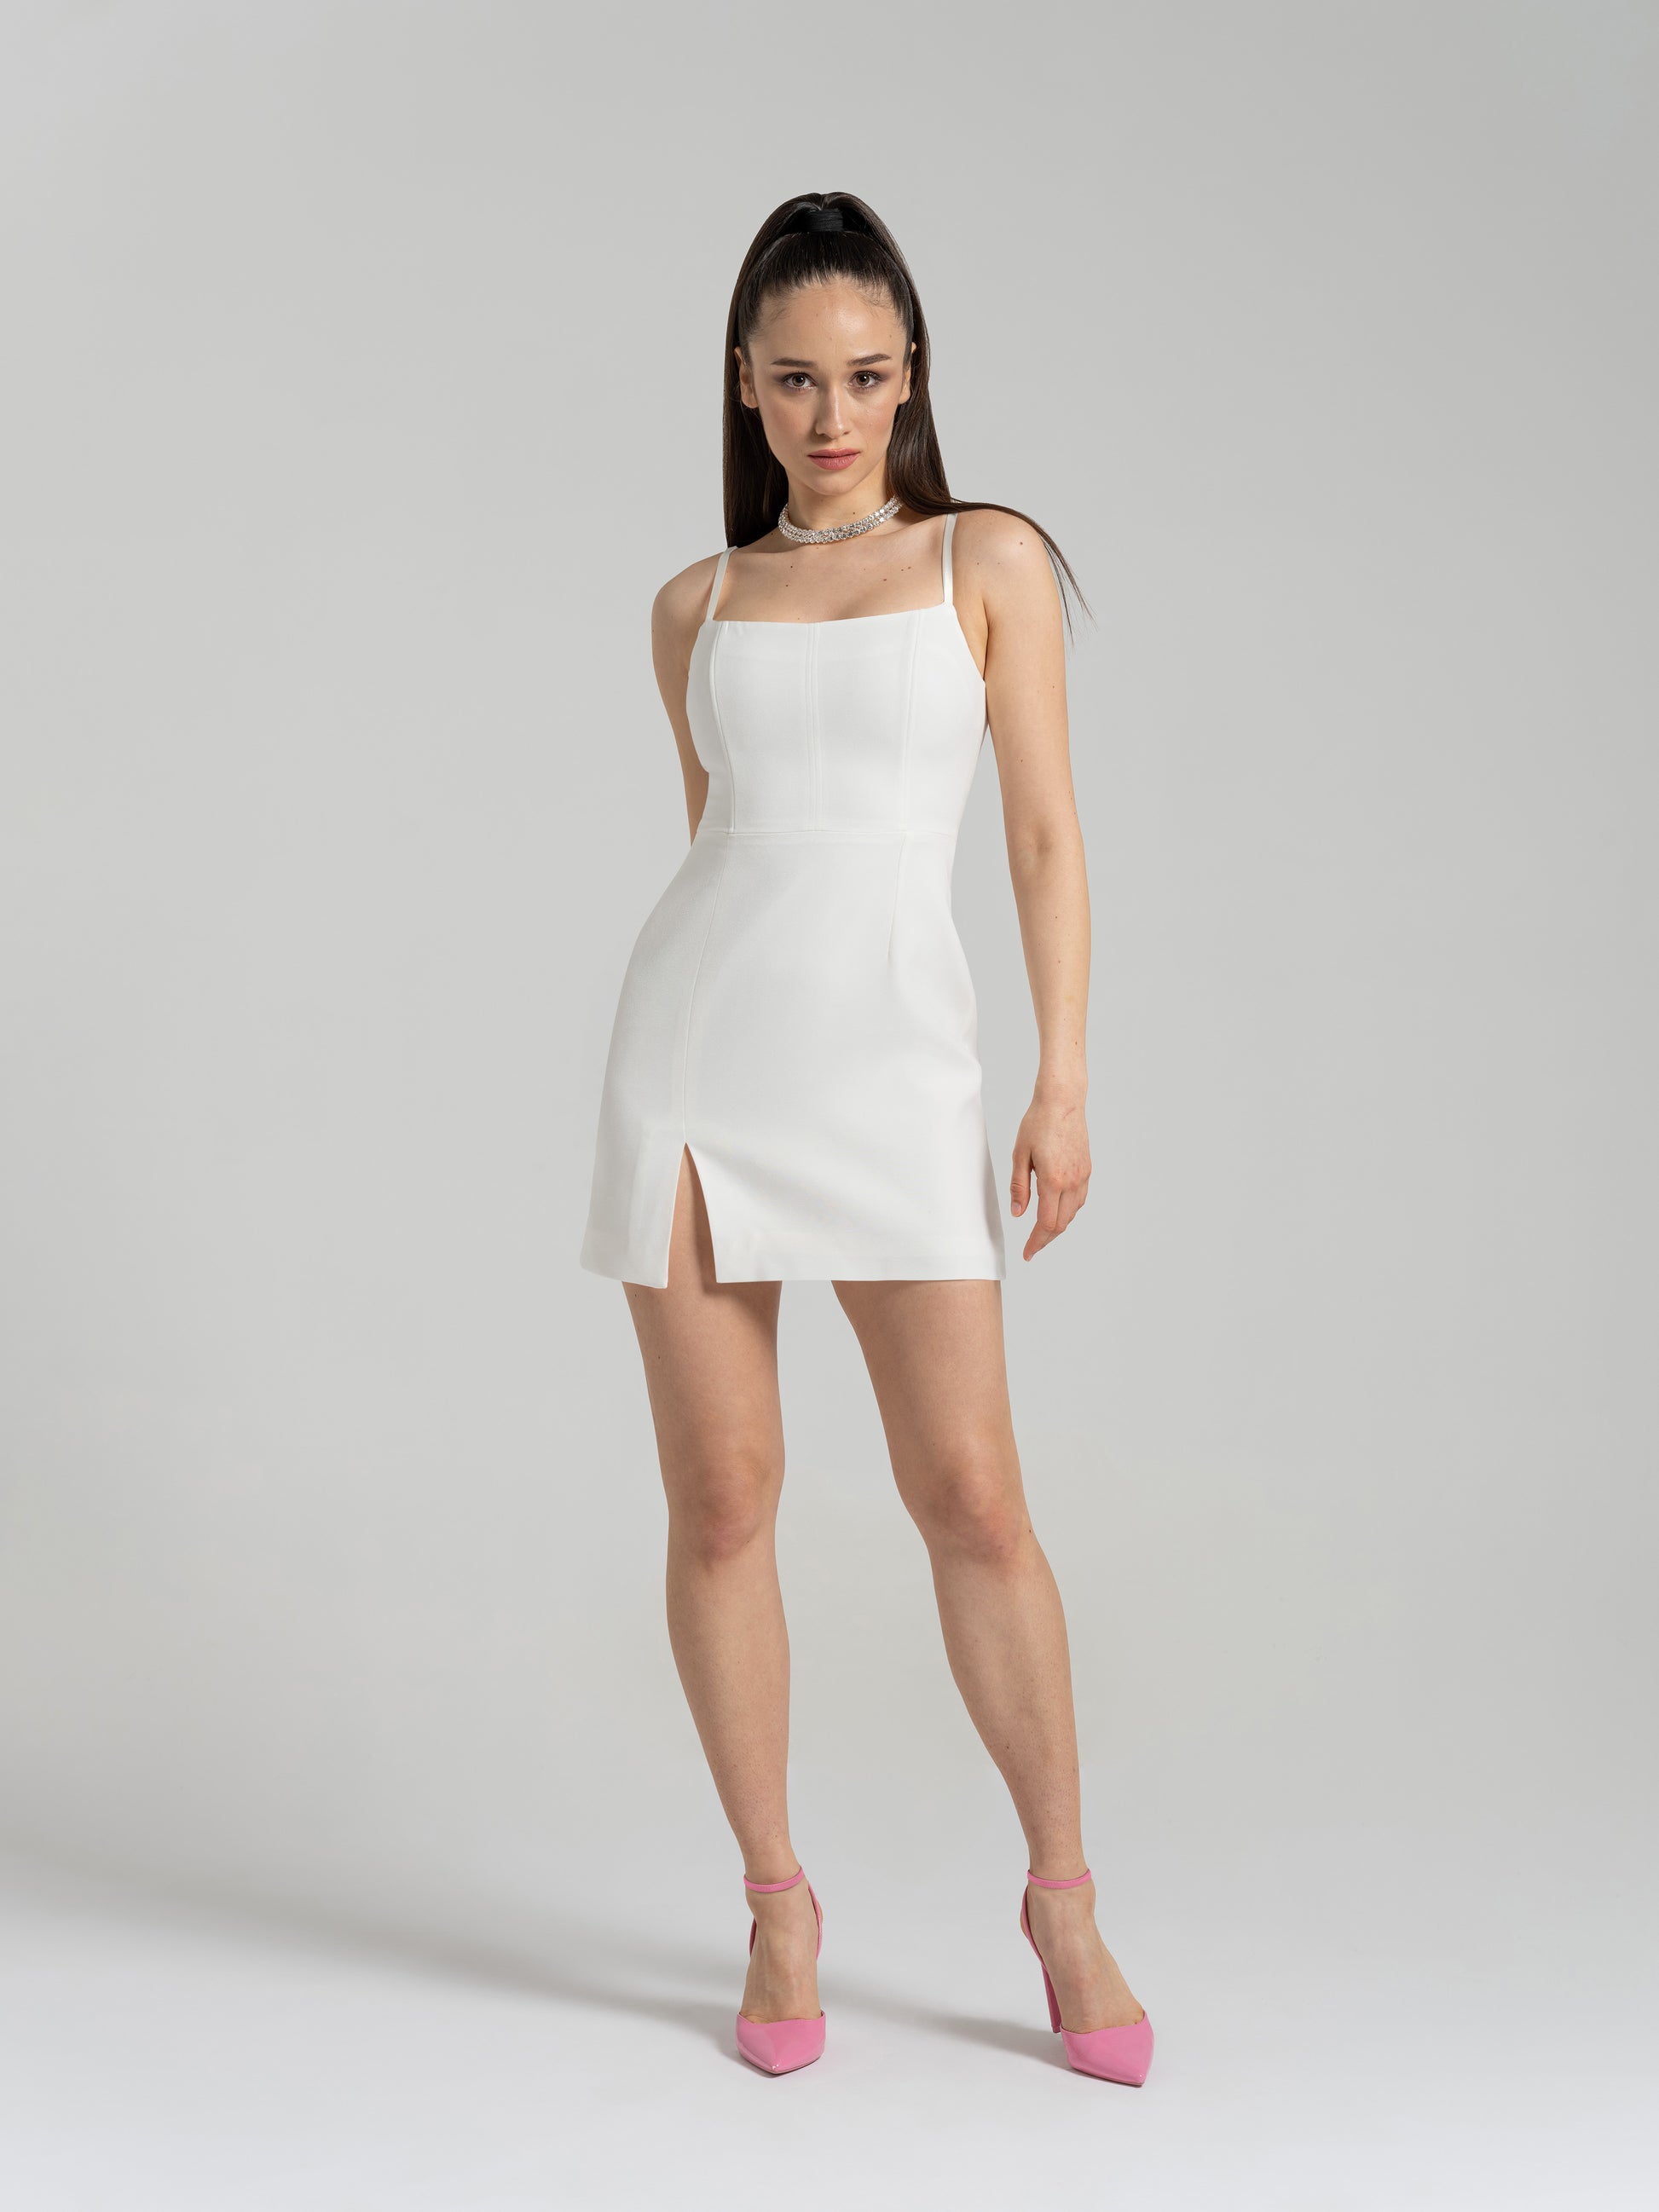 Into You Fitted Mini Dress - Pearl White by Tia Dorraine Women's Luxury Fashion Designer Clothing Brand